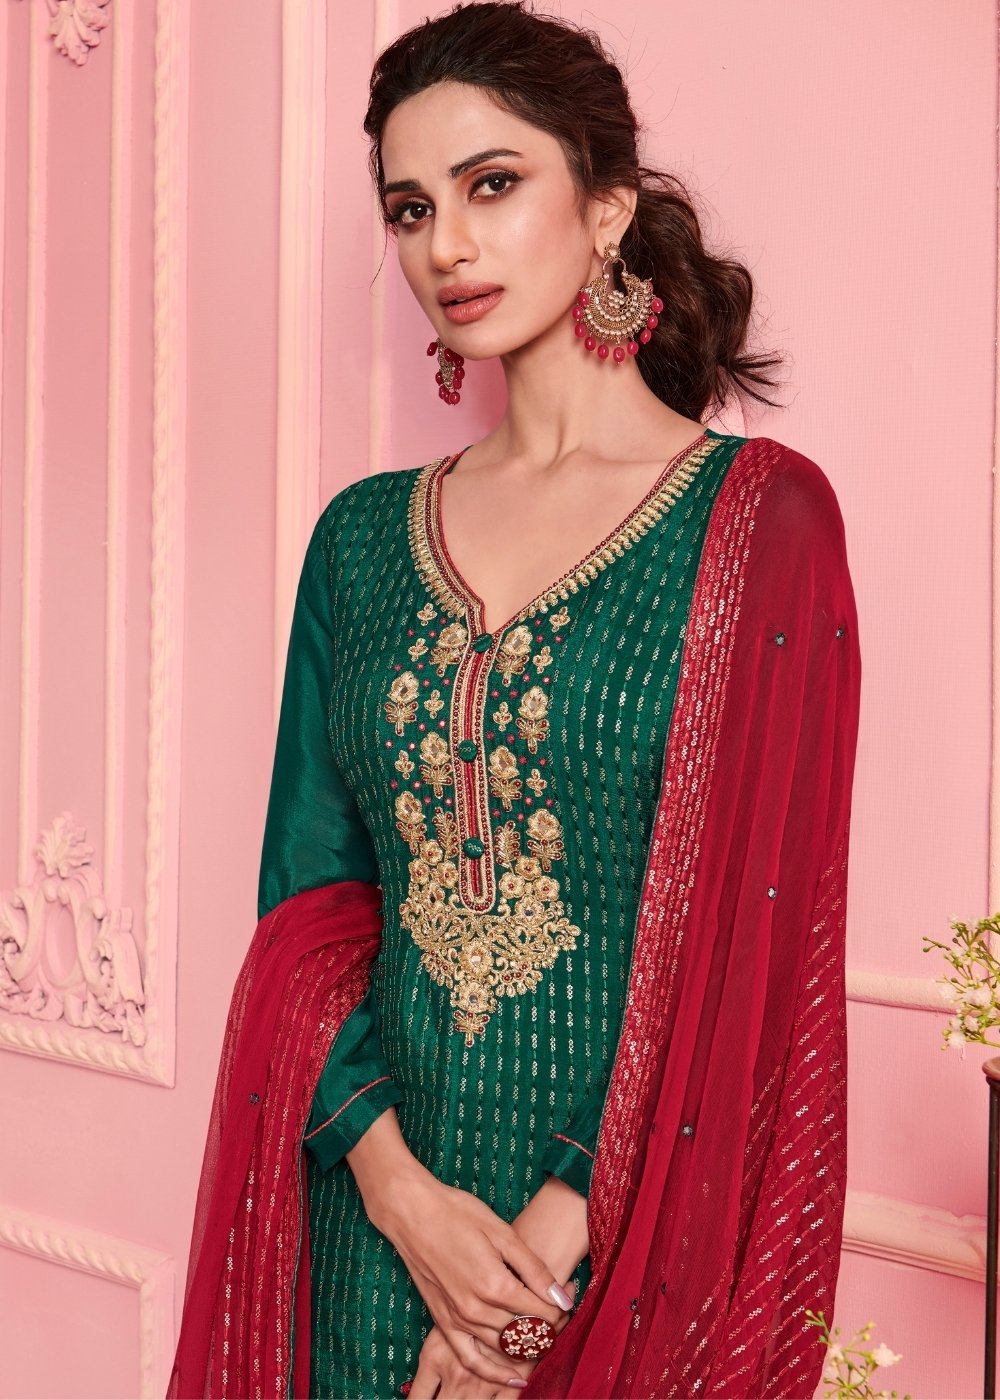 Jungle Green Georgette Salwar Suit with Thread & Zari Embroidery work By Qivii